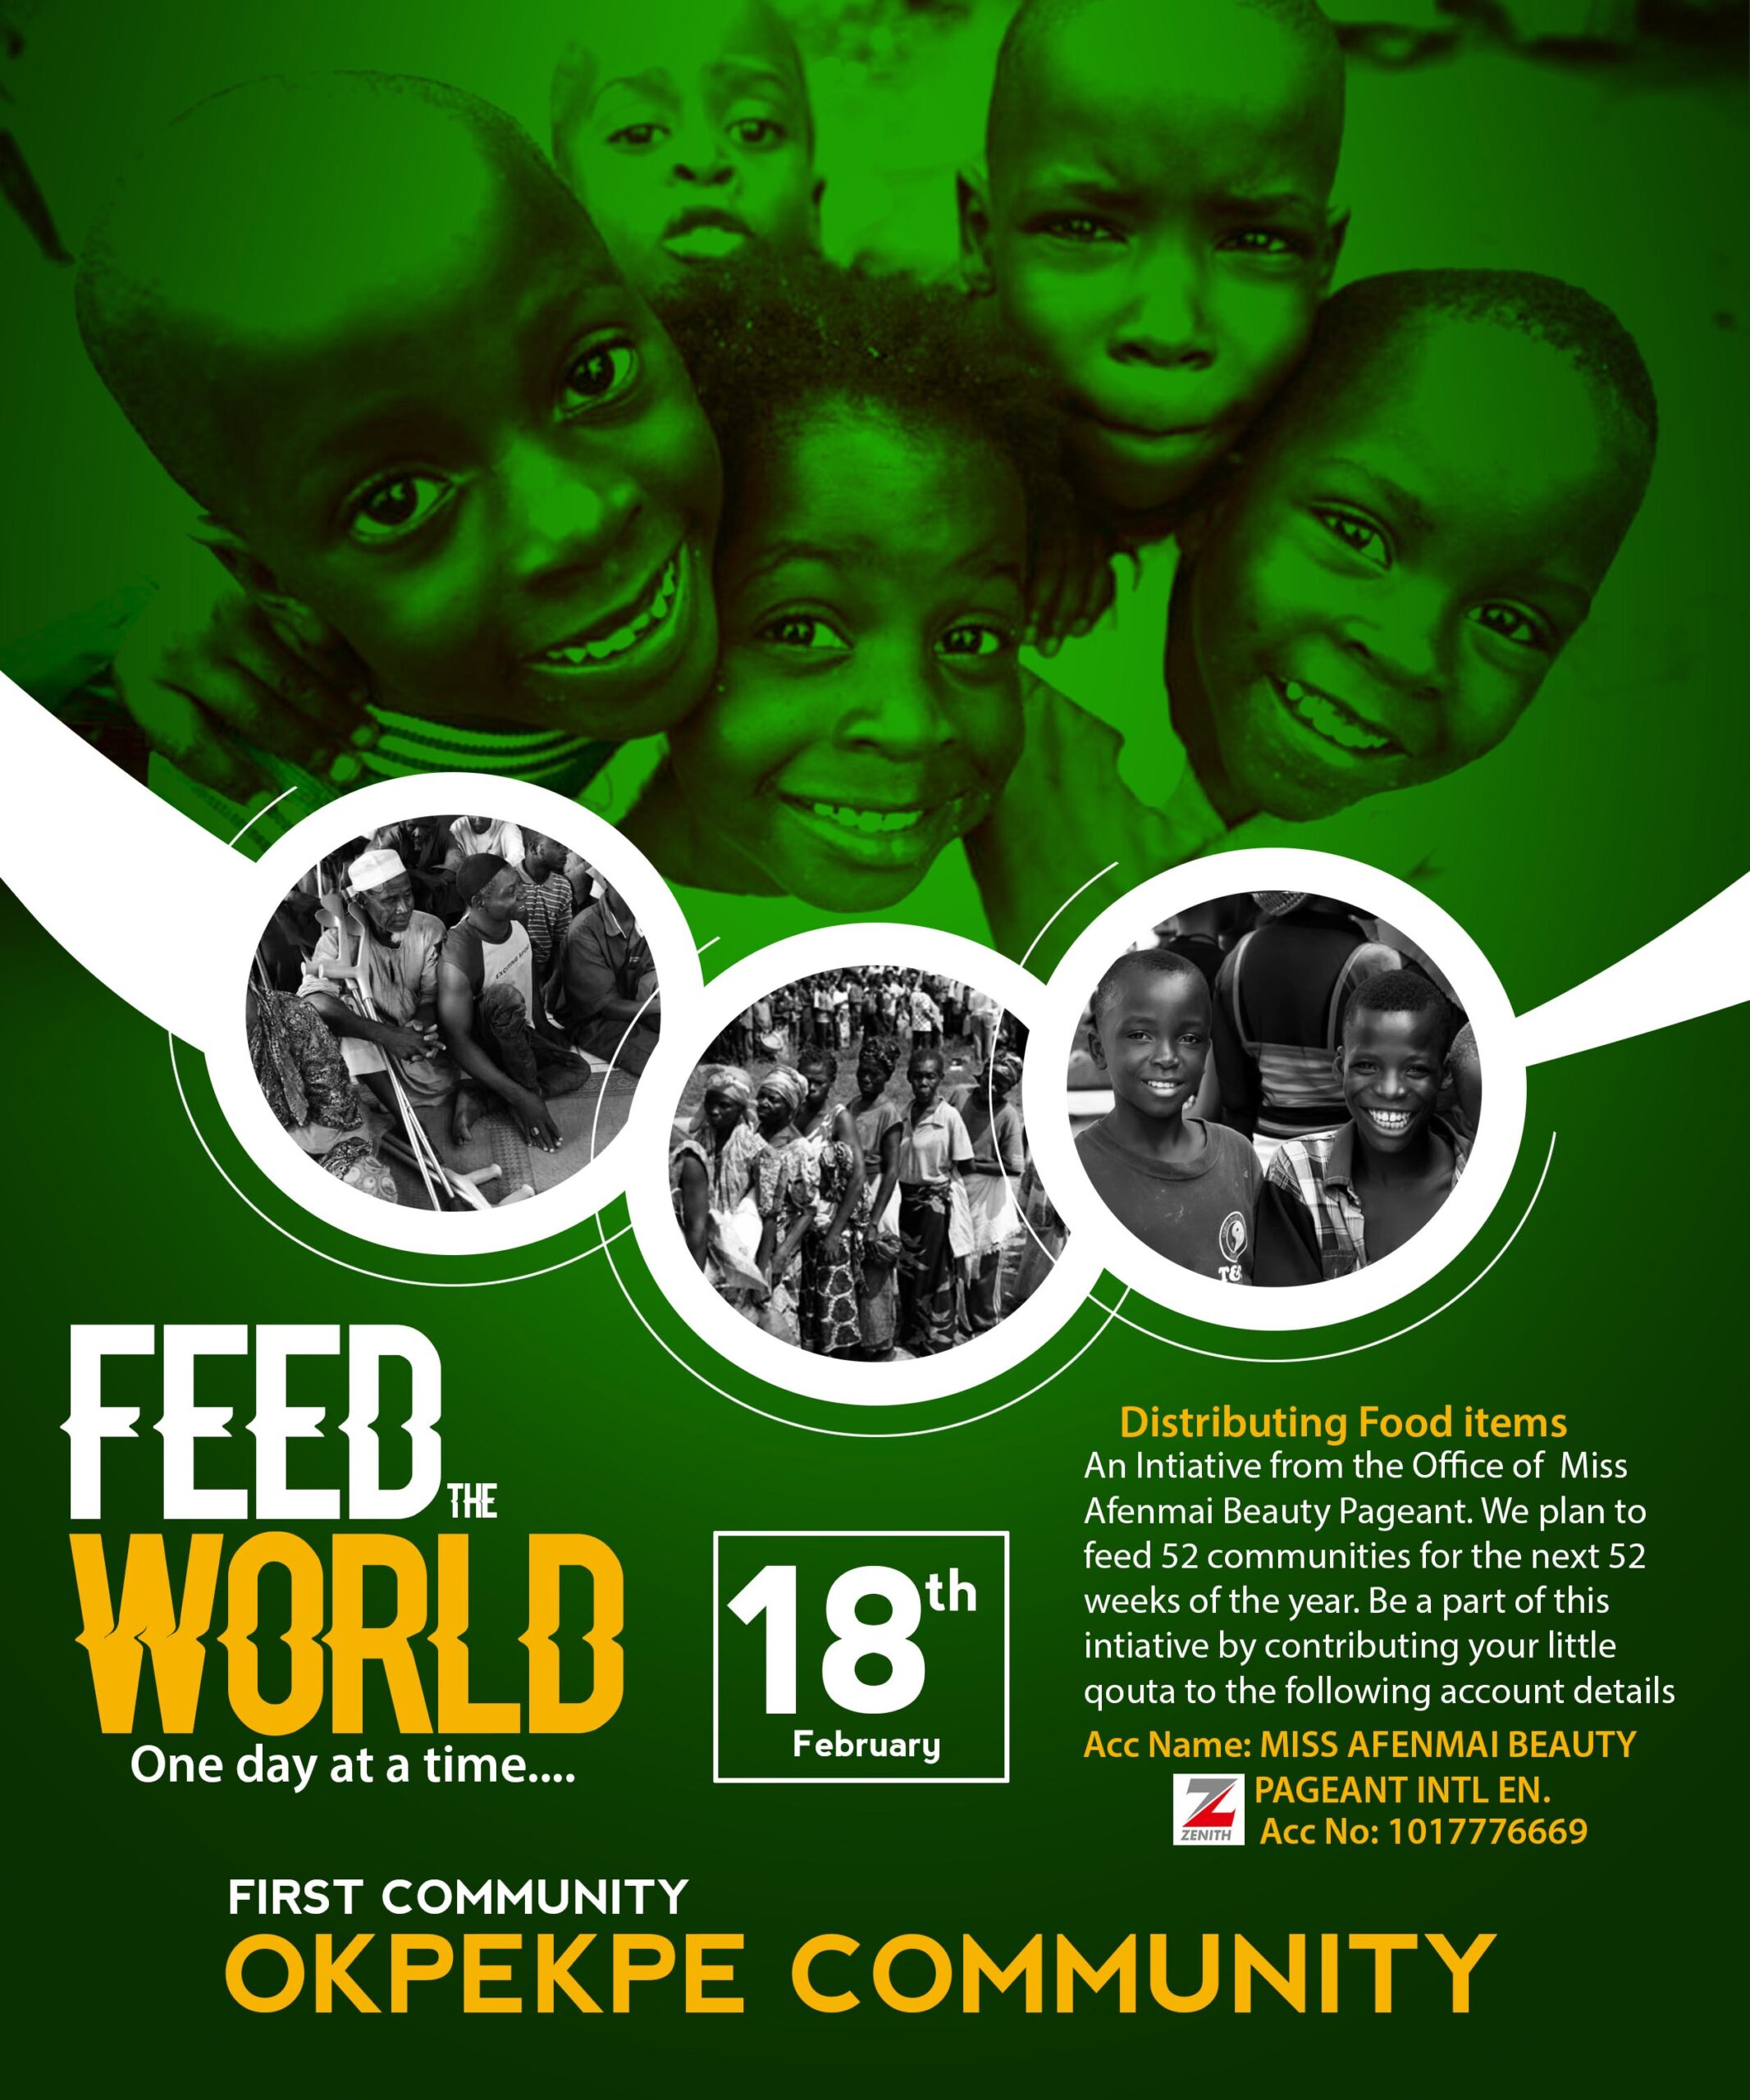 Feed the World, One day at a time.